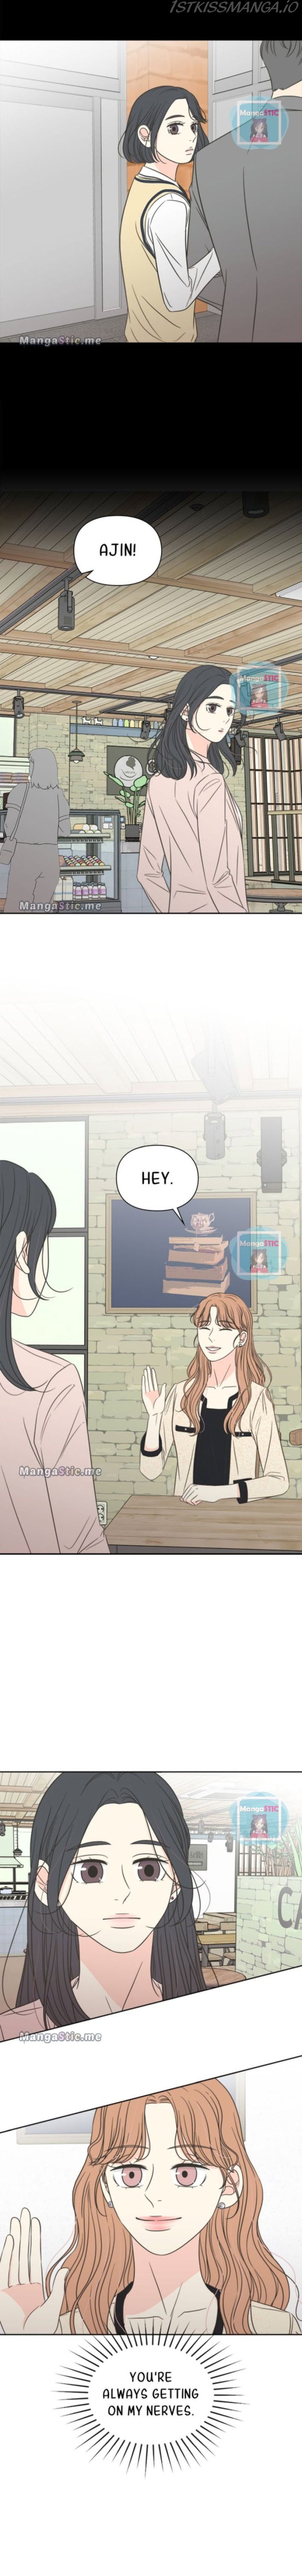 Check In to My Heart chapter 39 - Page 4